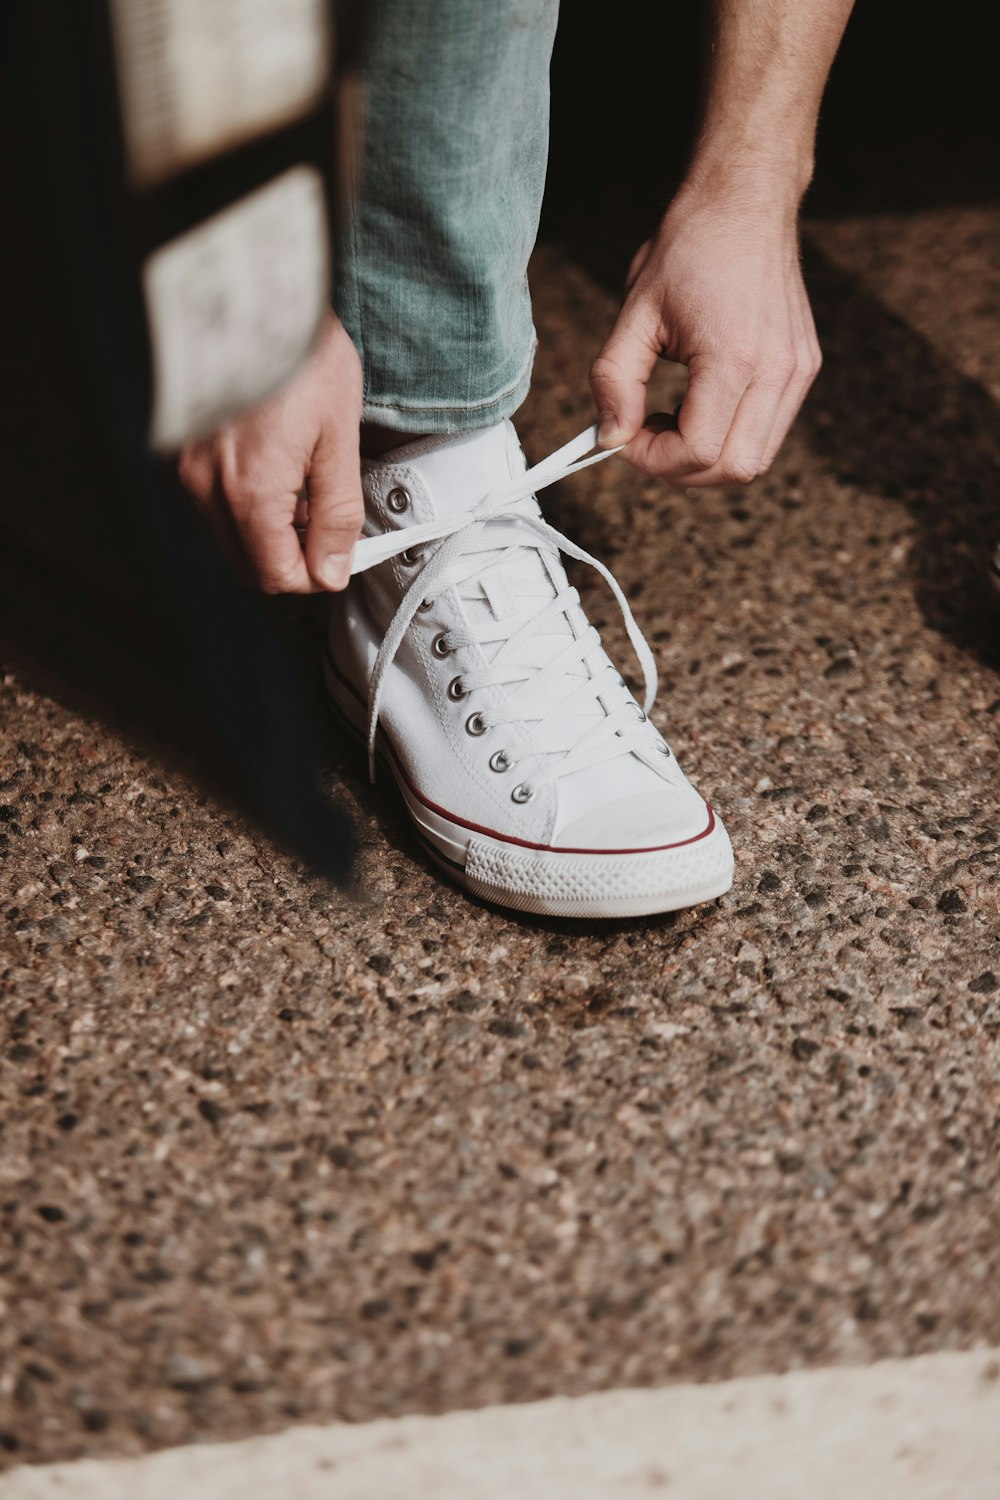 person wearing white converse all star high top sneakers photo – Free  Clothing Image on Unsplash